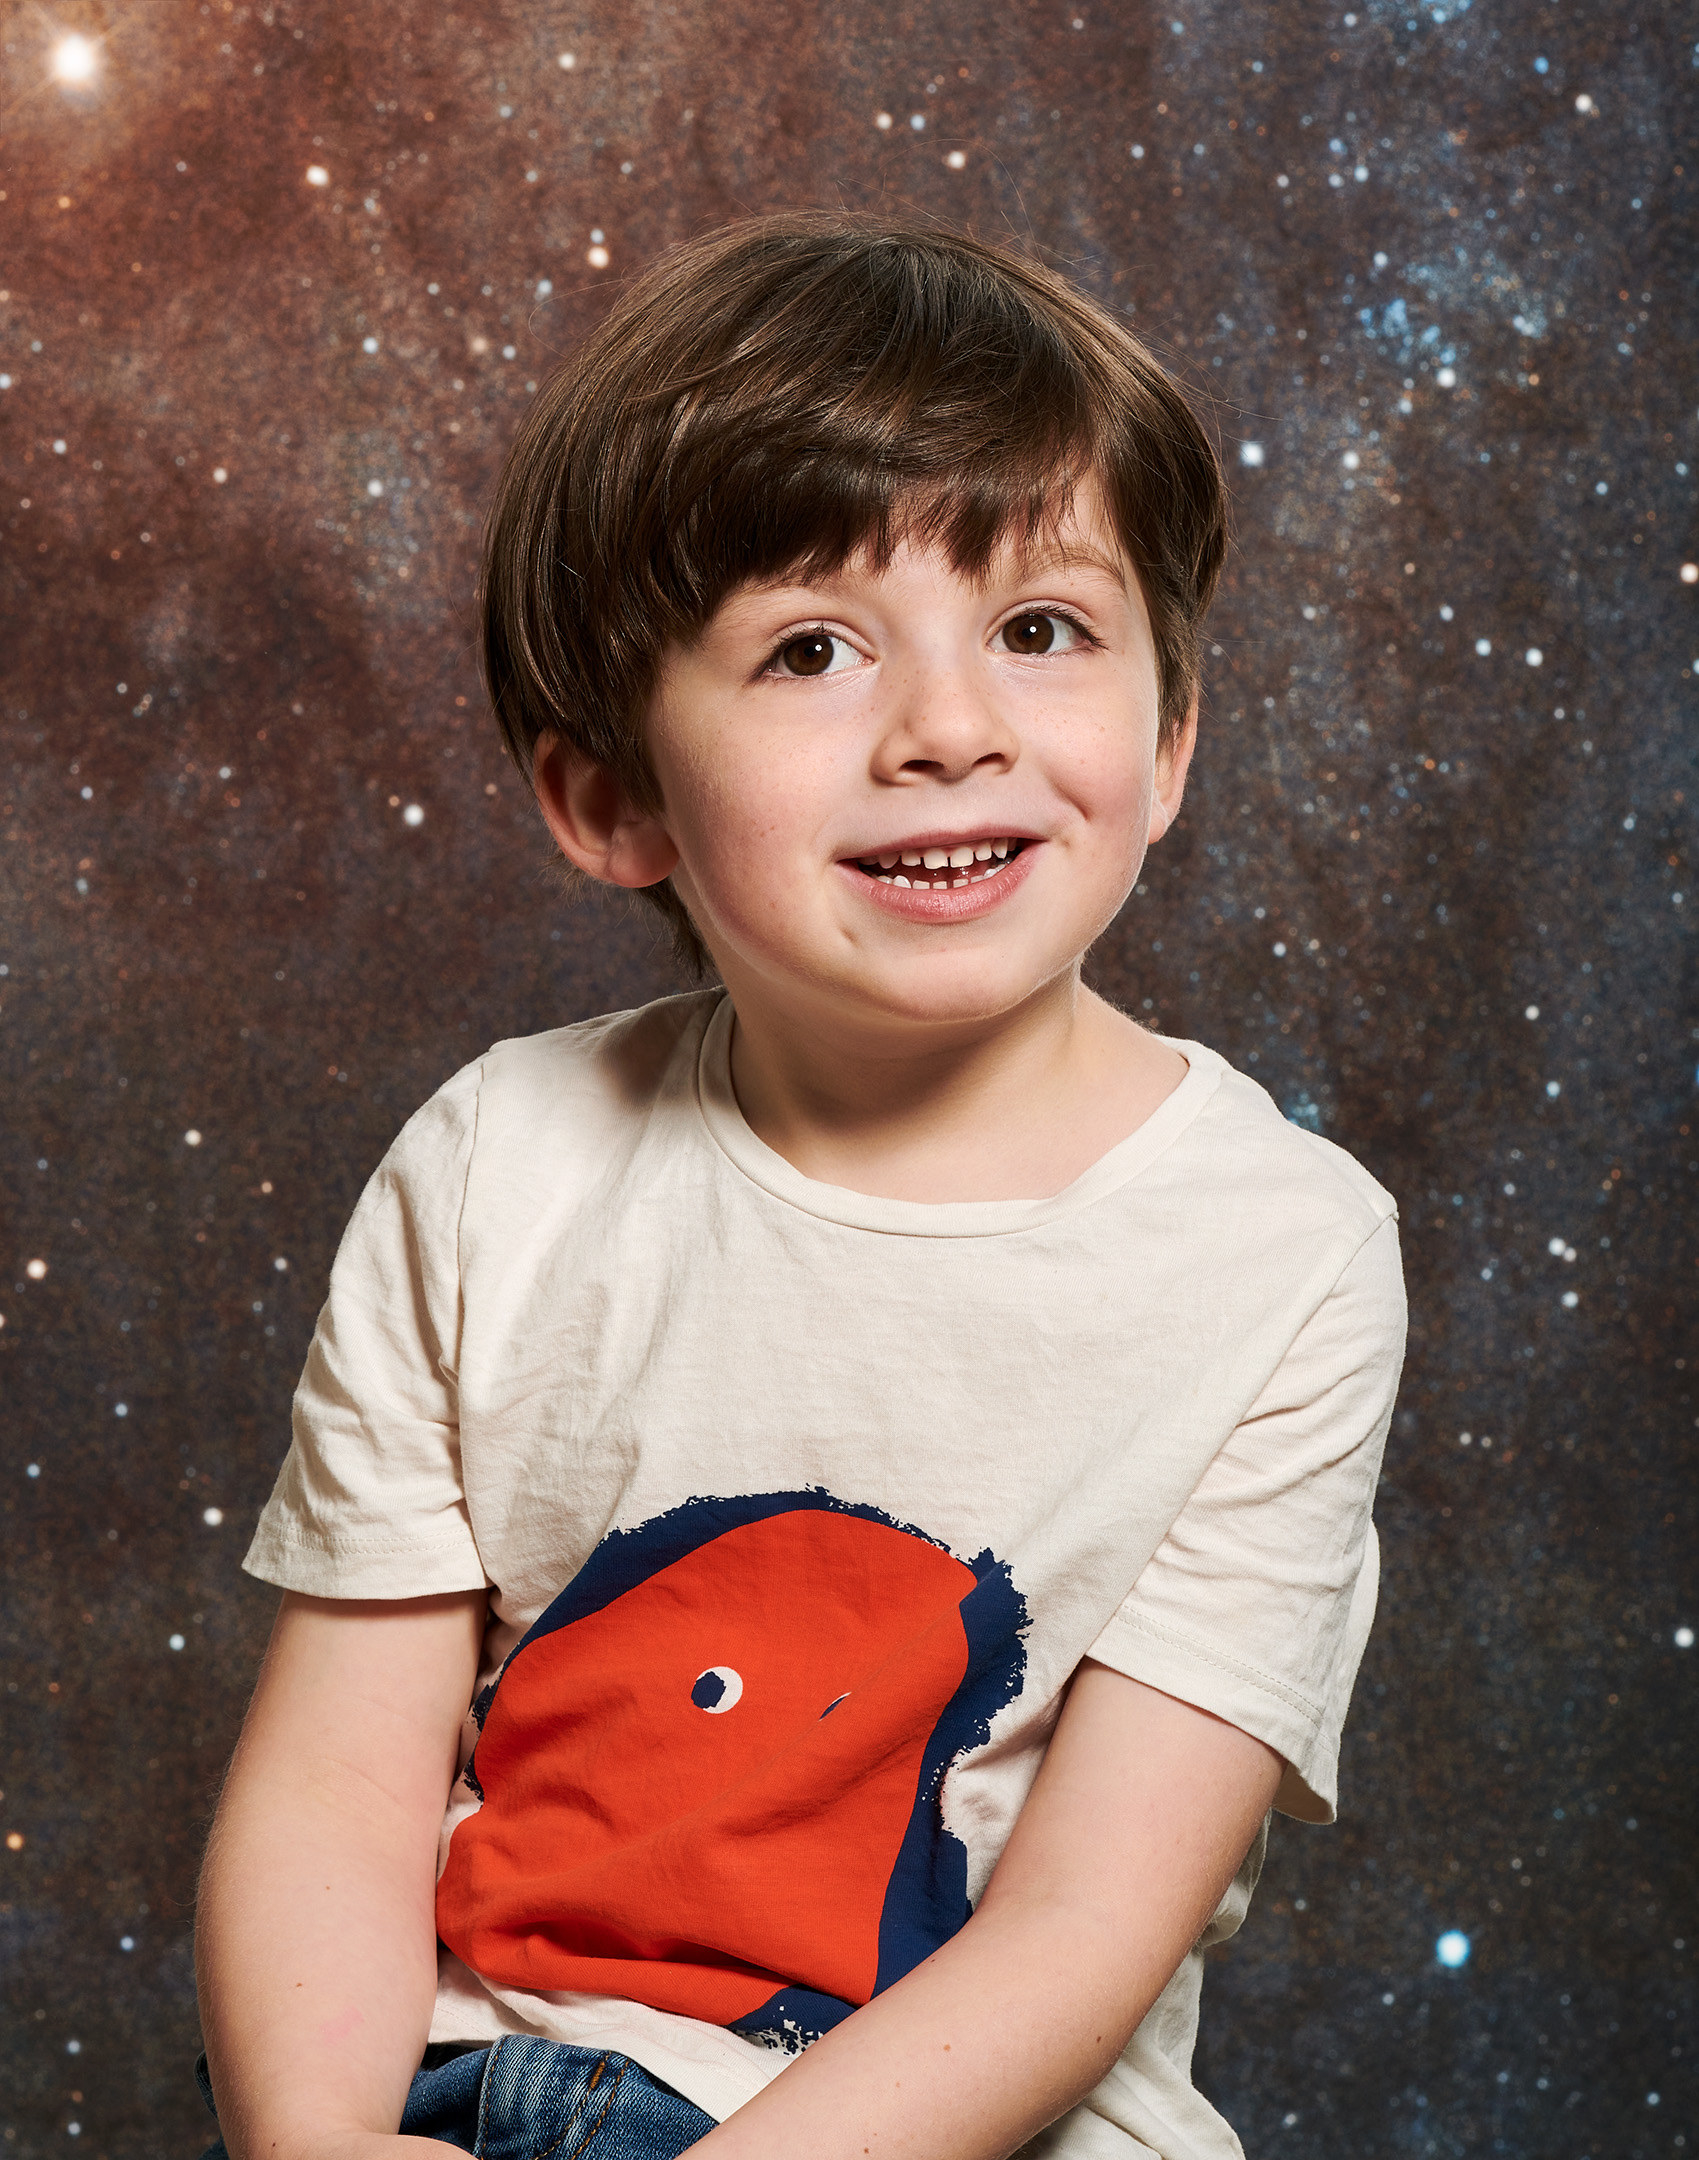 A young boy poses for a portrait in front of a backdrop of a galaxy and stars